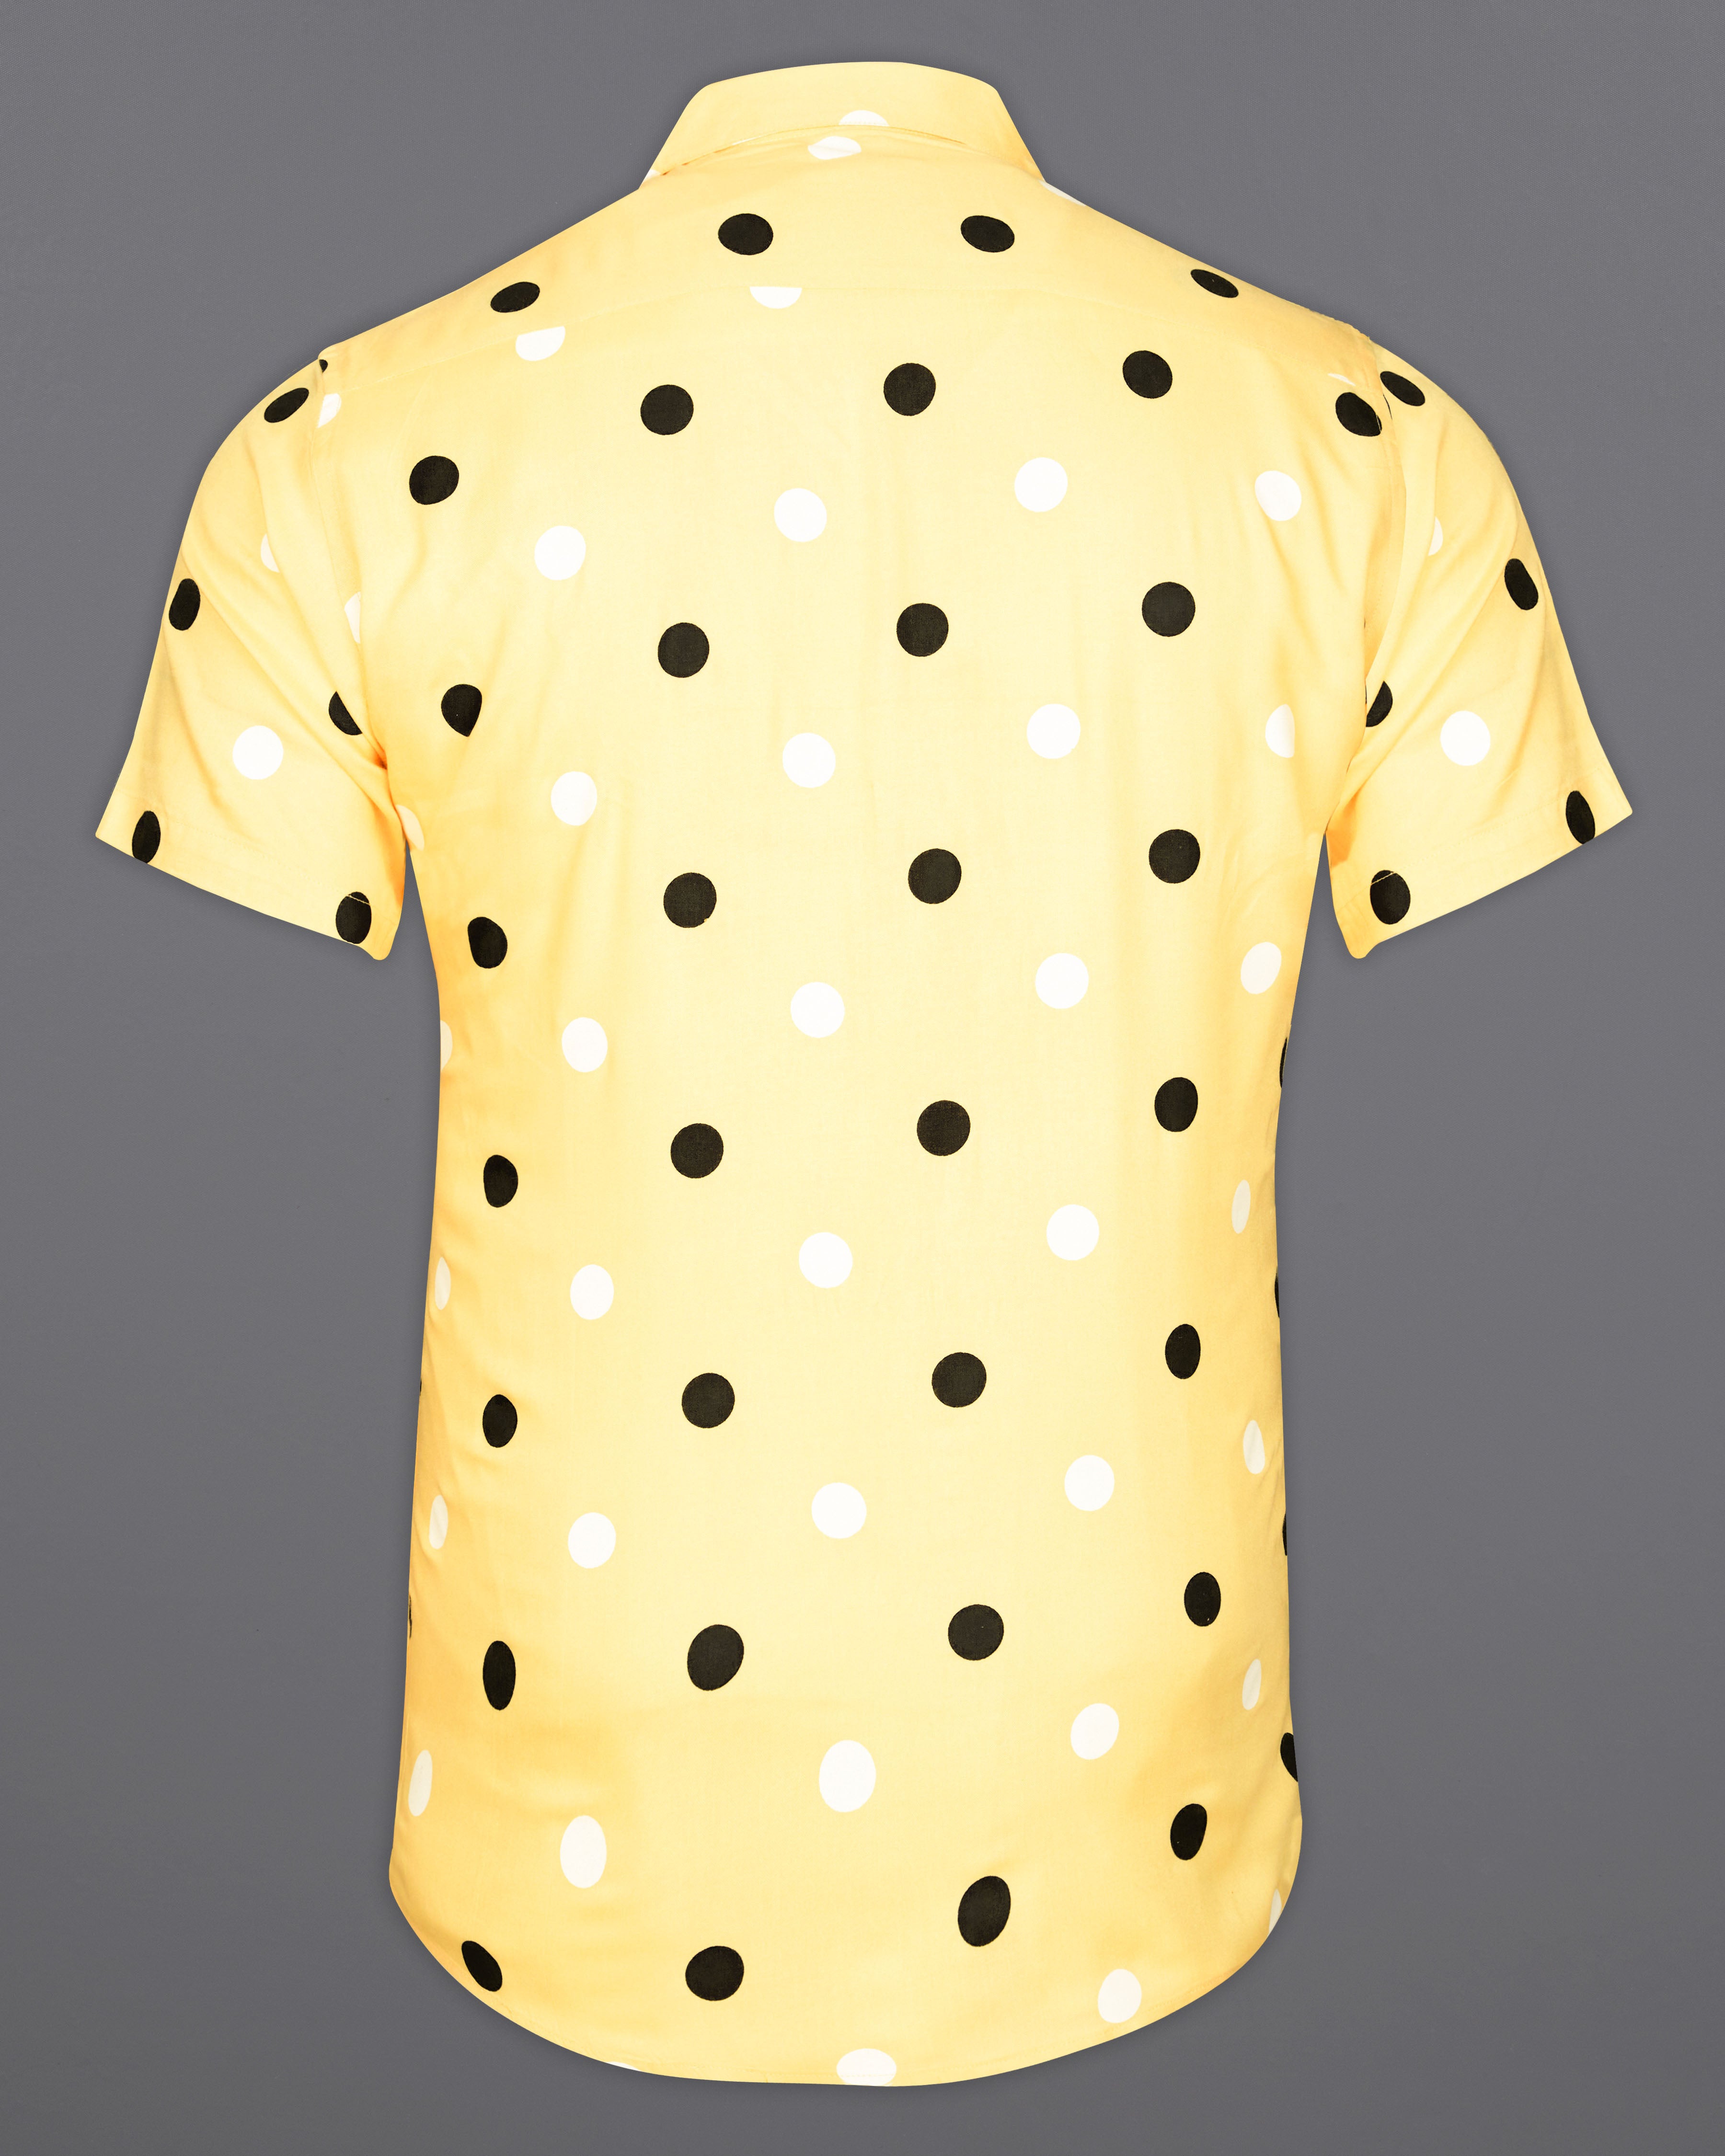 Colonial Yellow with Polka Dotted Half Sleeved Premium Tencel Shirt 9512-CC-BLK-SS-38, 9512-CC-BLK-SS-H-38, 9512-CC-BLK-SS-39, 9512-CC-BLK-SS-H-39, 9512-CC-BLK-SS-40, 9512-CC-BLK-SS-H-40, 9512-CC-BLK-SS-42, 9512-CC-BLK-SS-H-42, 9512-CC-BLK-SS-44, 9512-CC-BLK-SS-H-44, 9512-CC-BLK-SS-46, 9512-CC-BLK-SS-H-46, 9512-CC-BLK-SS-48, 9512-CC-BLK-SS-H-48, 9512-CC-BLK-SS-50, 9512-CC-BLK-SS-H-50, 9512-CC-BLK-SS-52, 9512-CC-BLK-SS-H-52